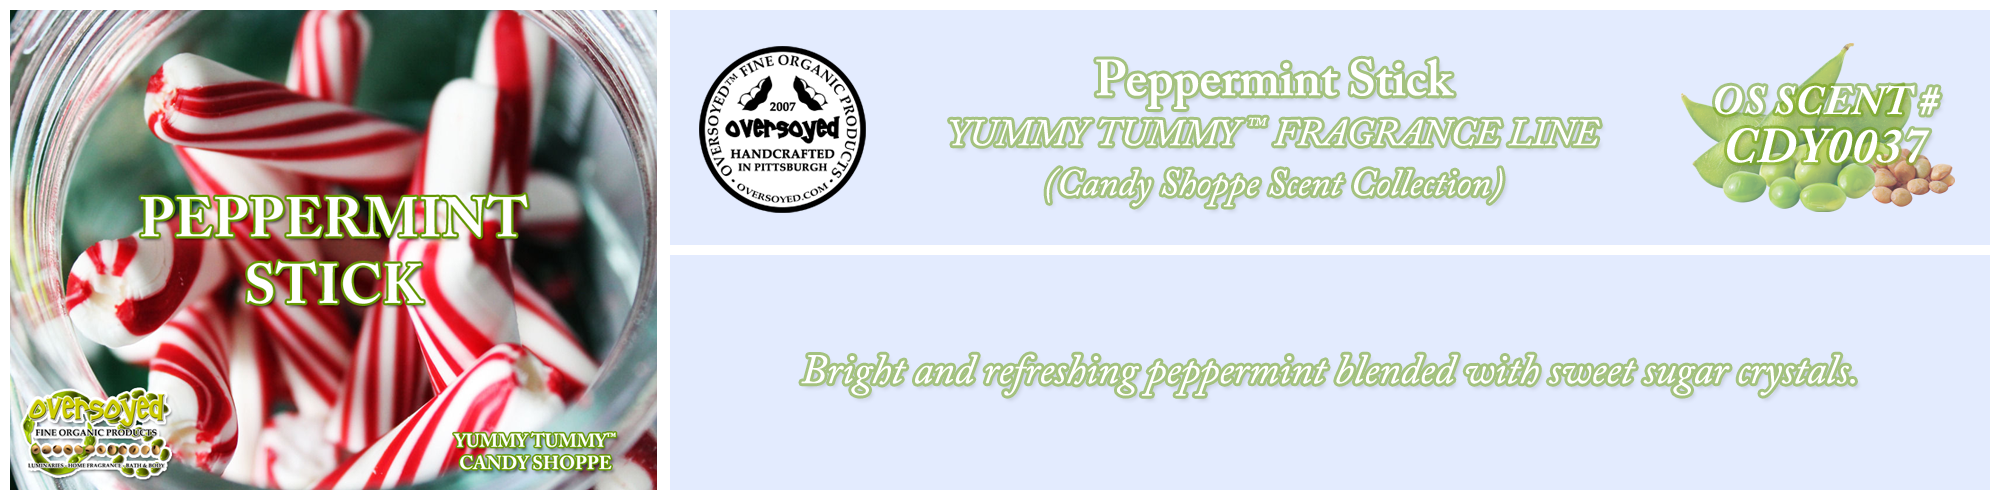 Peppermint Stick Handcrafted Products Collection